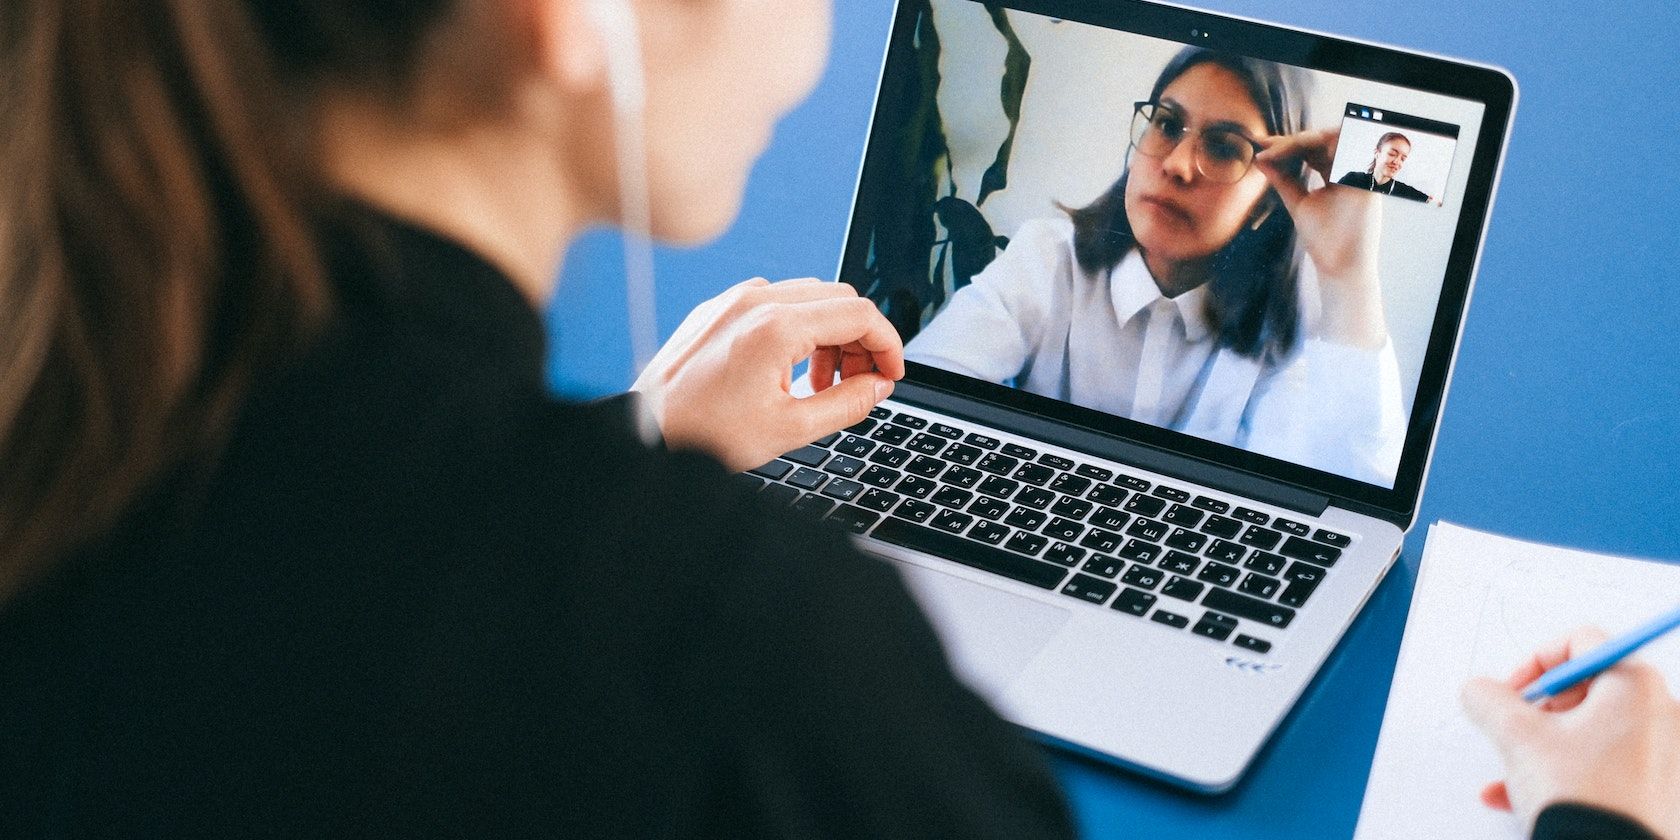 Two corporate women on a video call